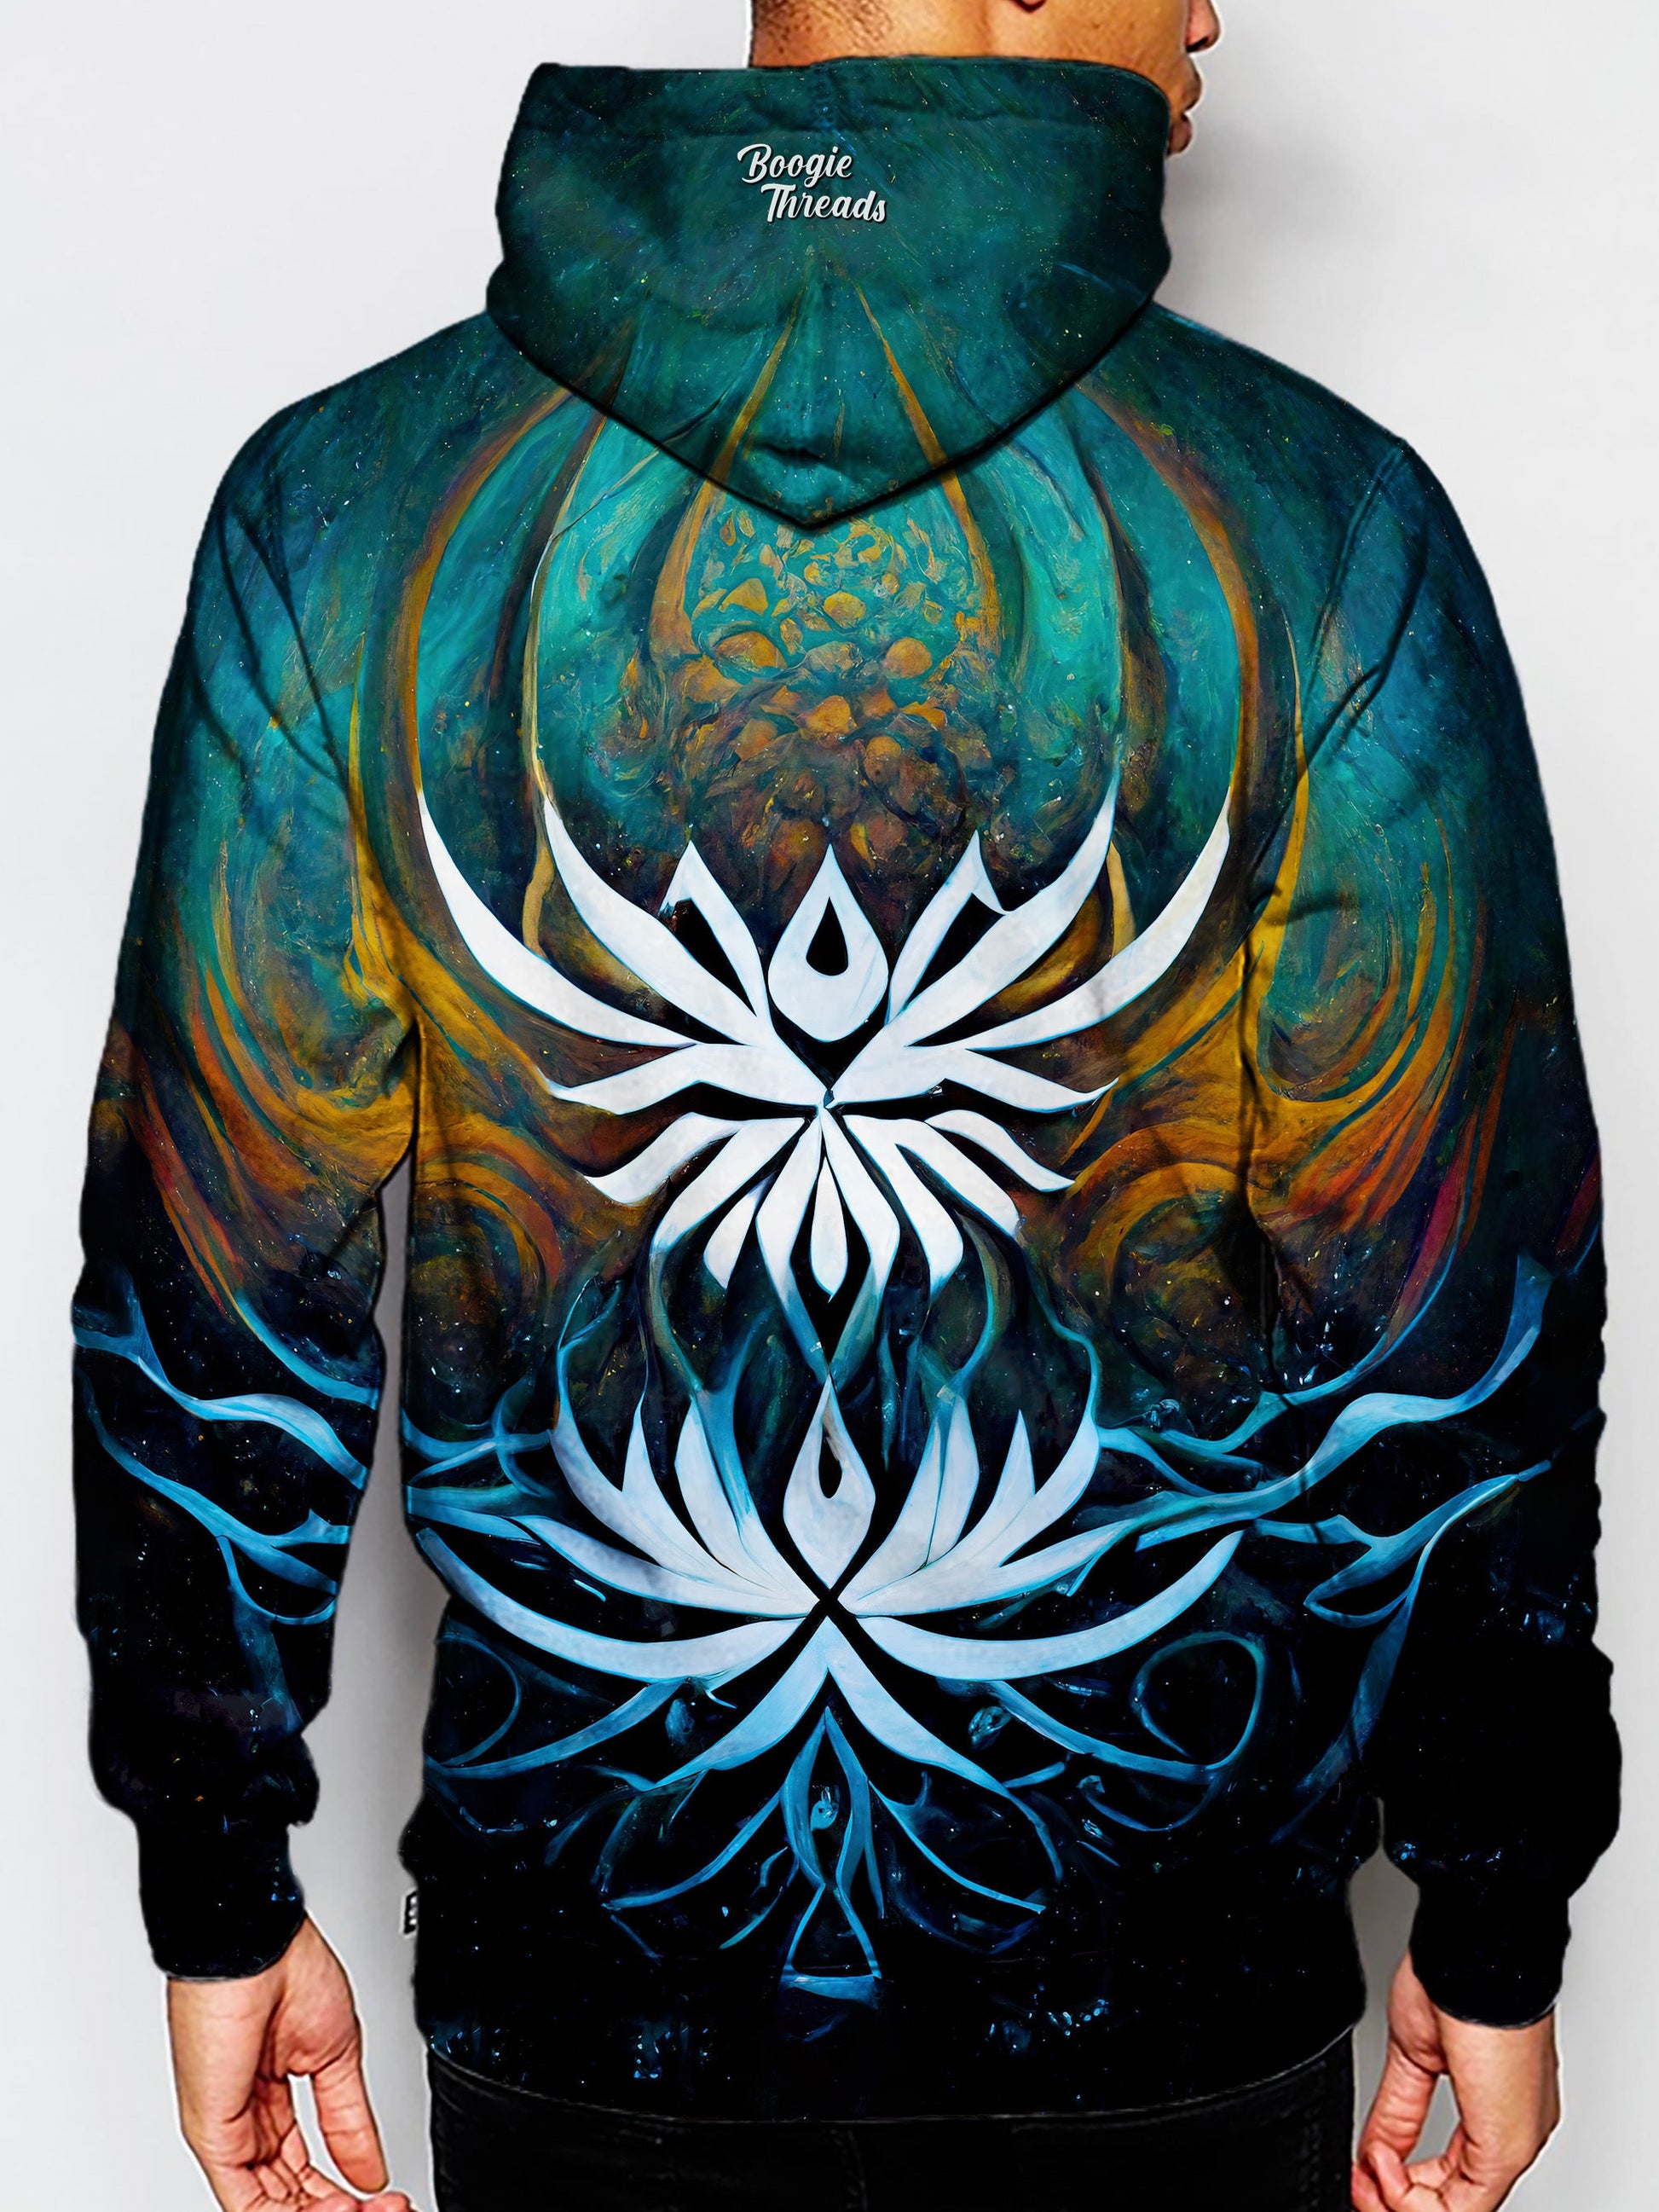 Gracious Desire Unisex Pullover Hoodie - EDM Festival Clothing - Boogie Threads